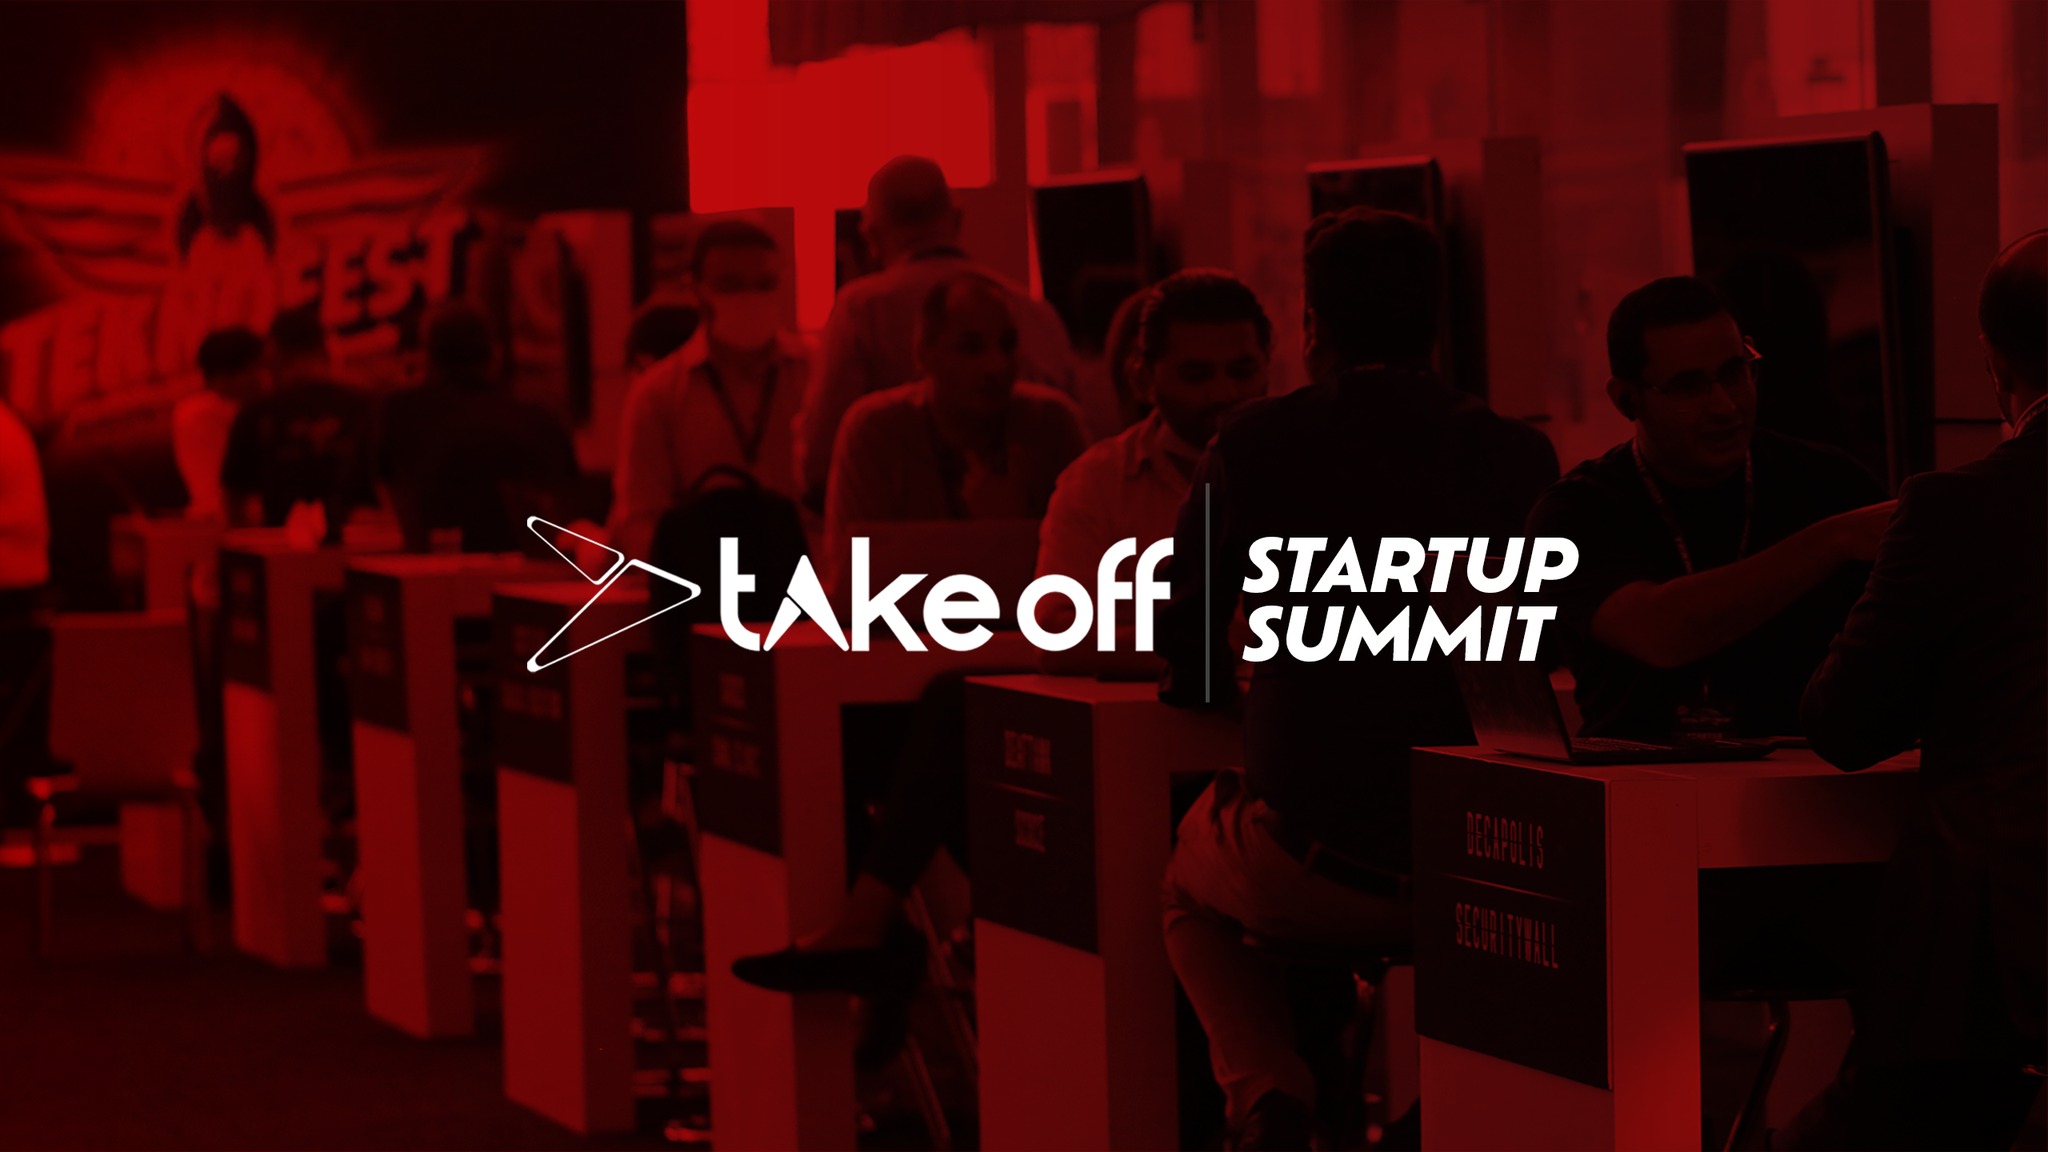 Take Off Startup Summit-Application is open